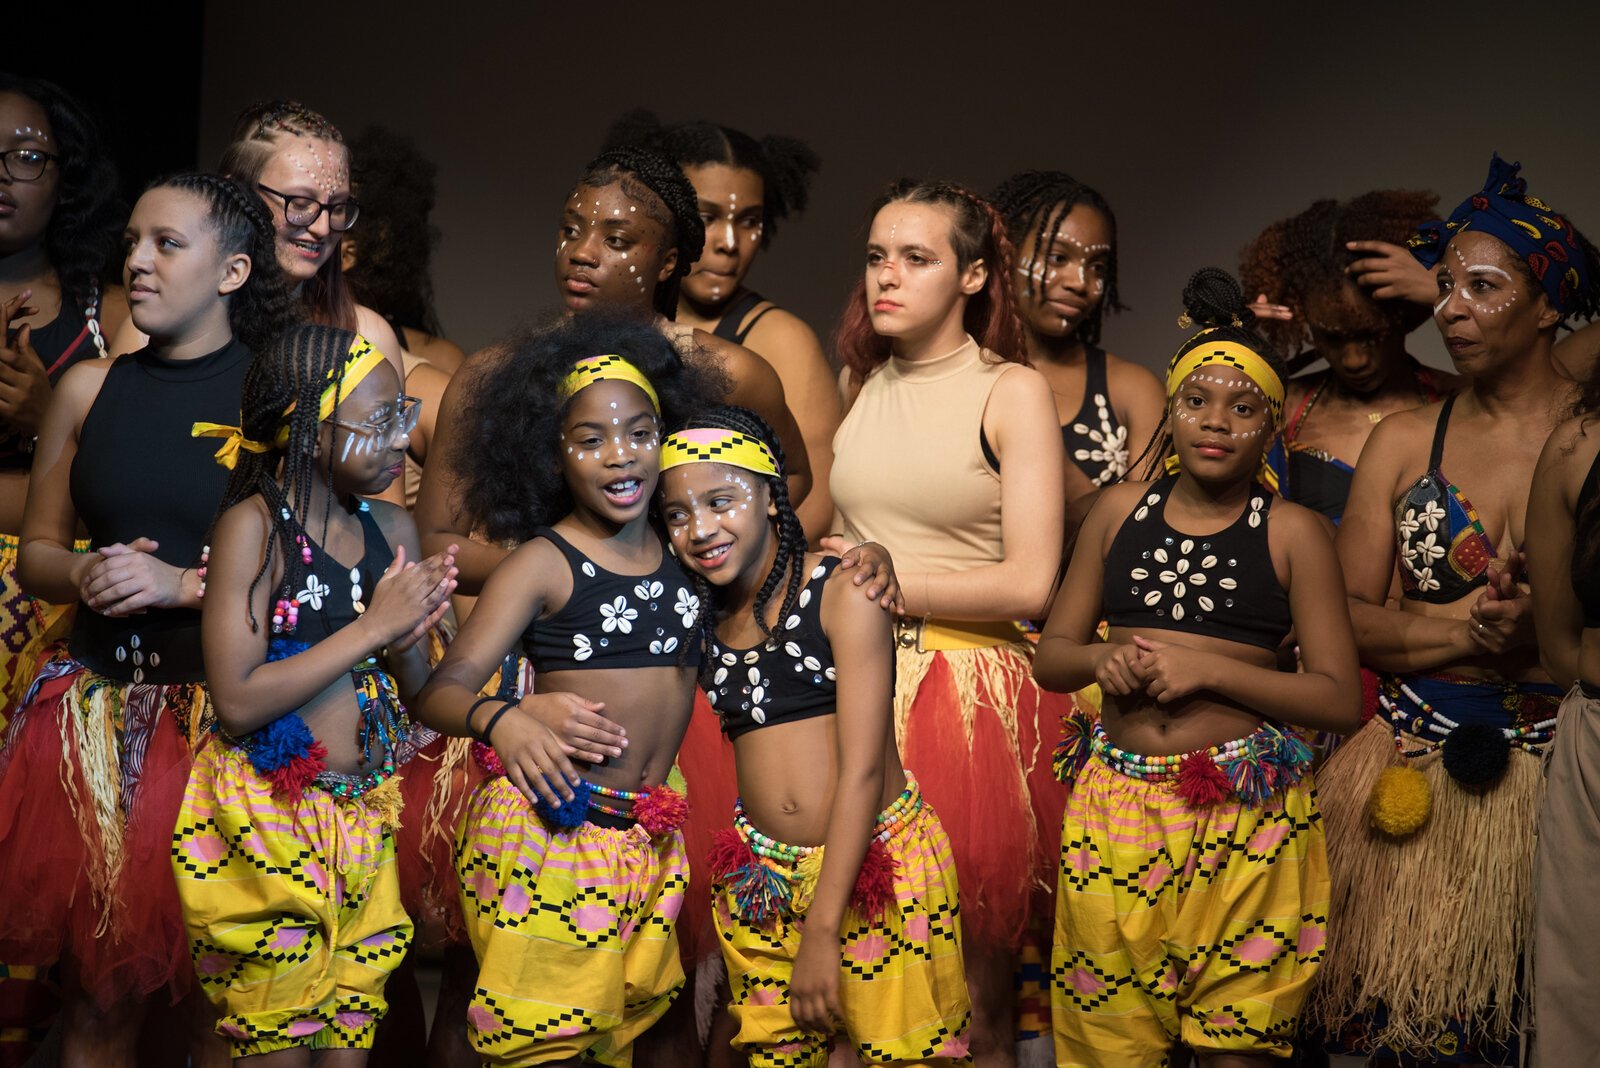 This photo was taken at the Rootead Youth Drum & Dance Ensemble (RYDDE) Showcase in December 2023. "It was a joyous event," says photographer Fran Dwight, "and then these girls came out and they were just smiling and having the time of their lives."